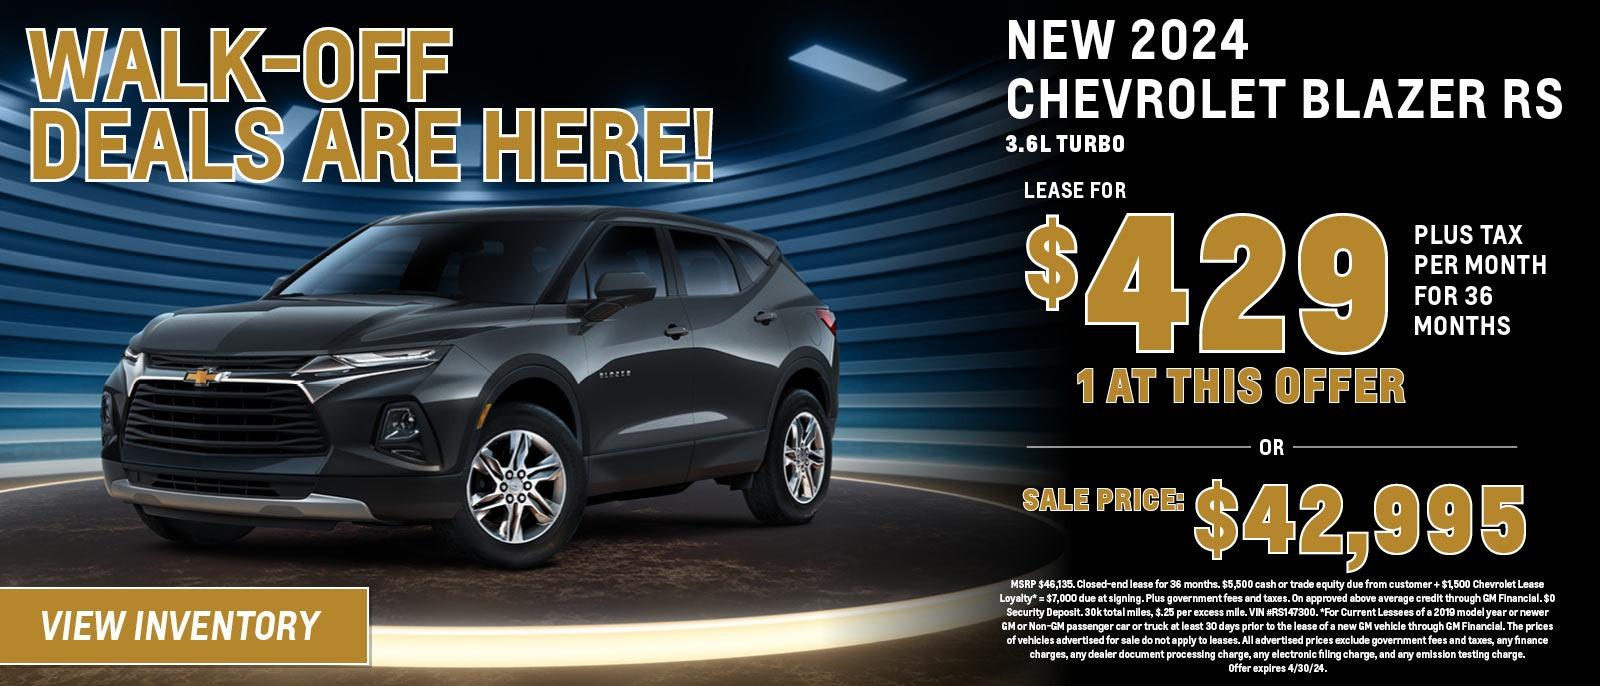 New 2024 Chevrolet Blazer RS
Lease for $429/36 months plus tax or Sale price $42,995
1 at this offer